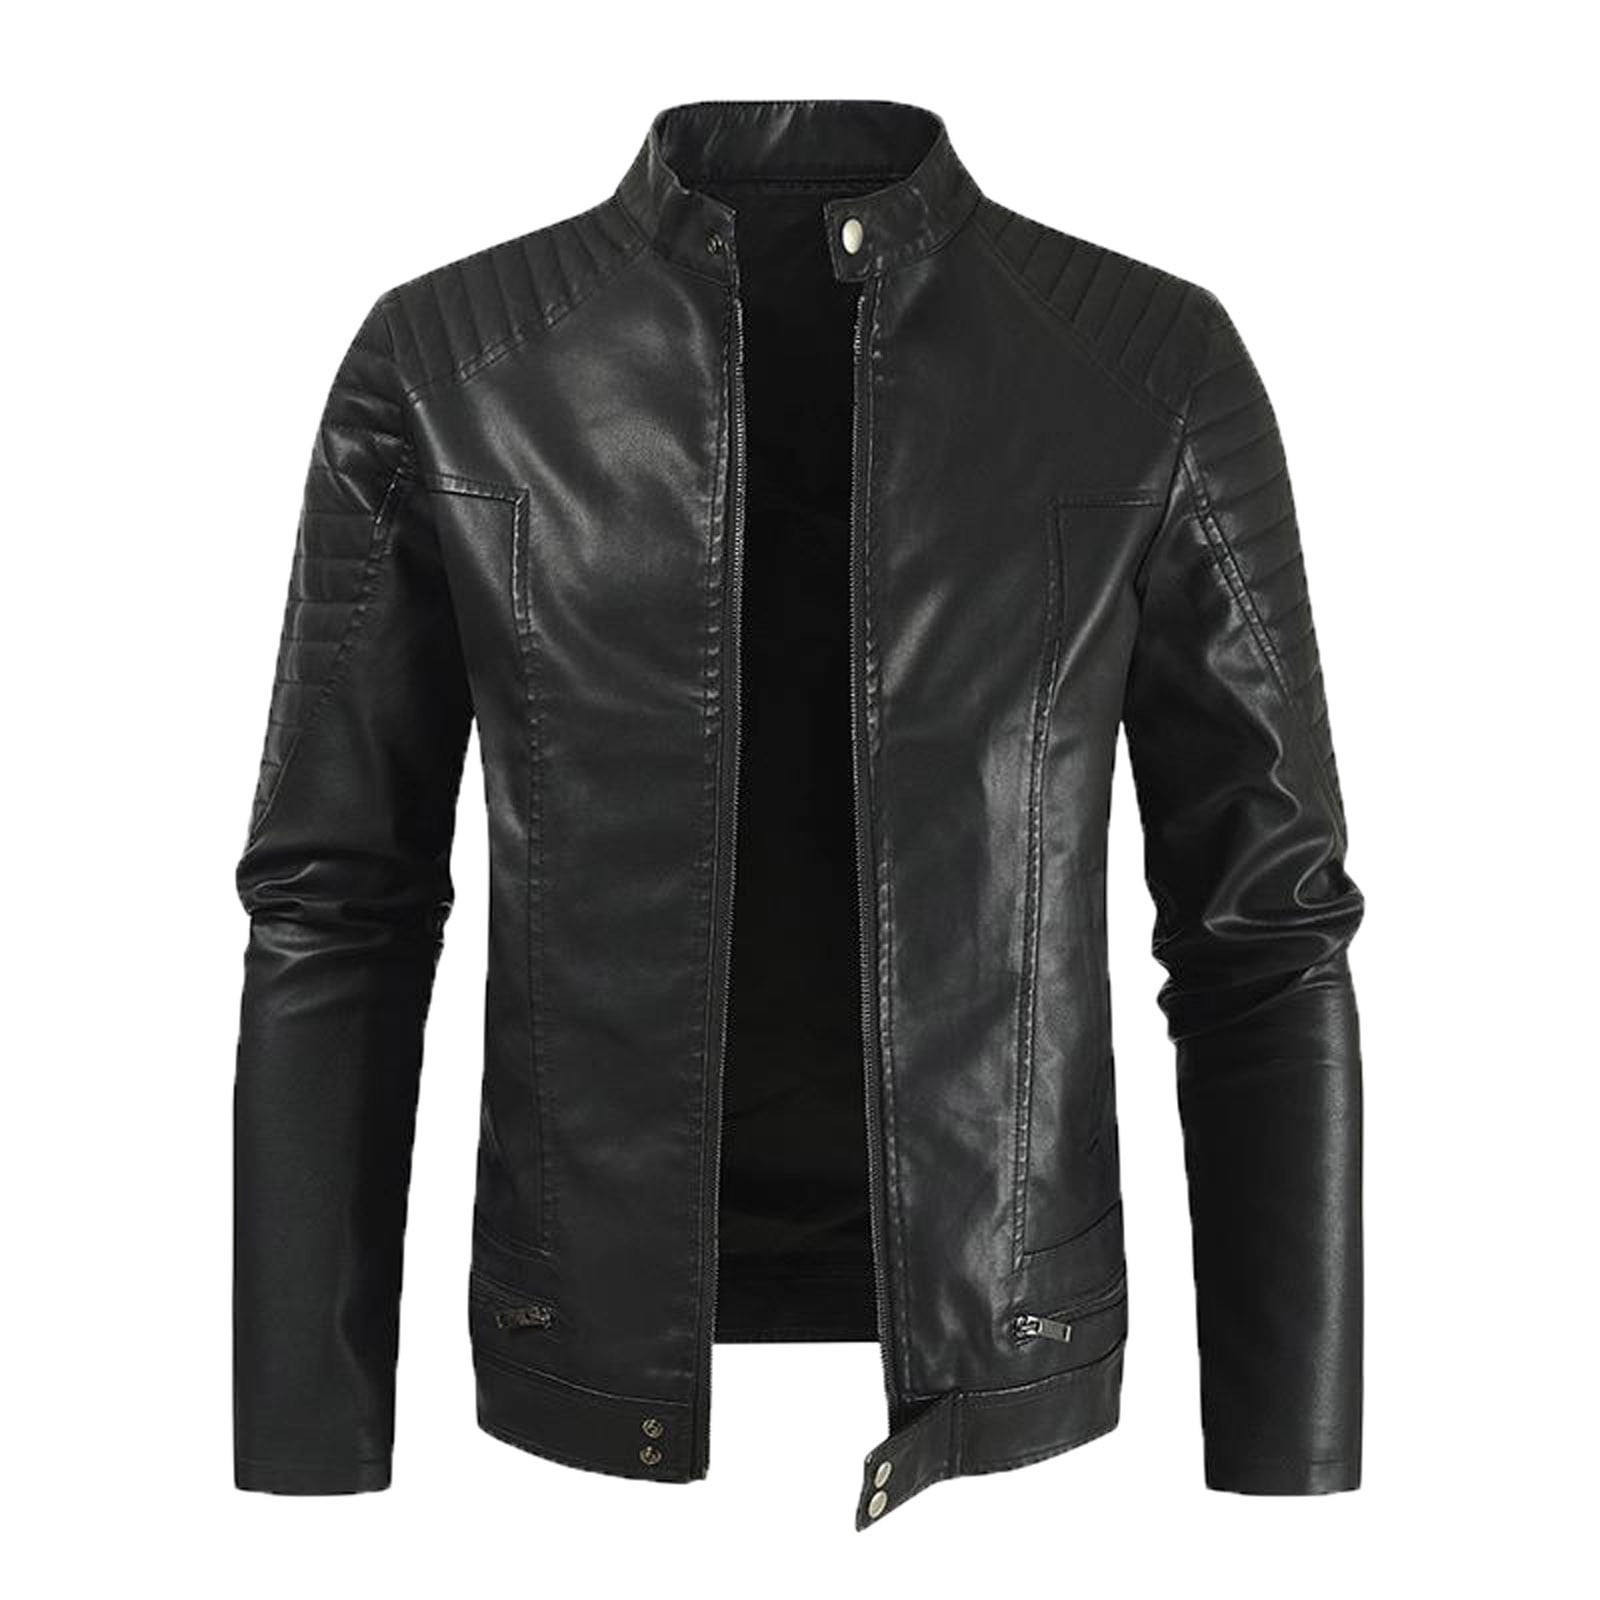 Men’s Casual Stand Collar PU Faux Leather Jackets Zip Up Slim Fit  Motorcycle Biker Bomber Jacket Winter Warm Coat